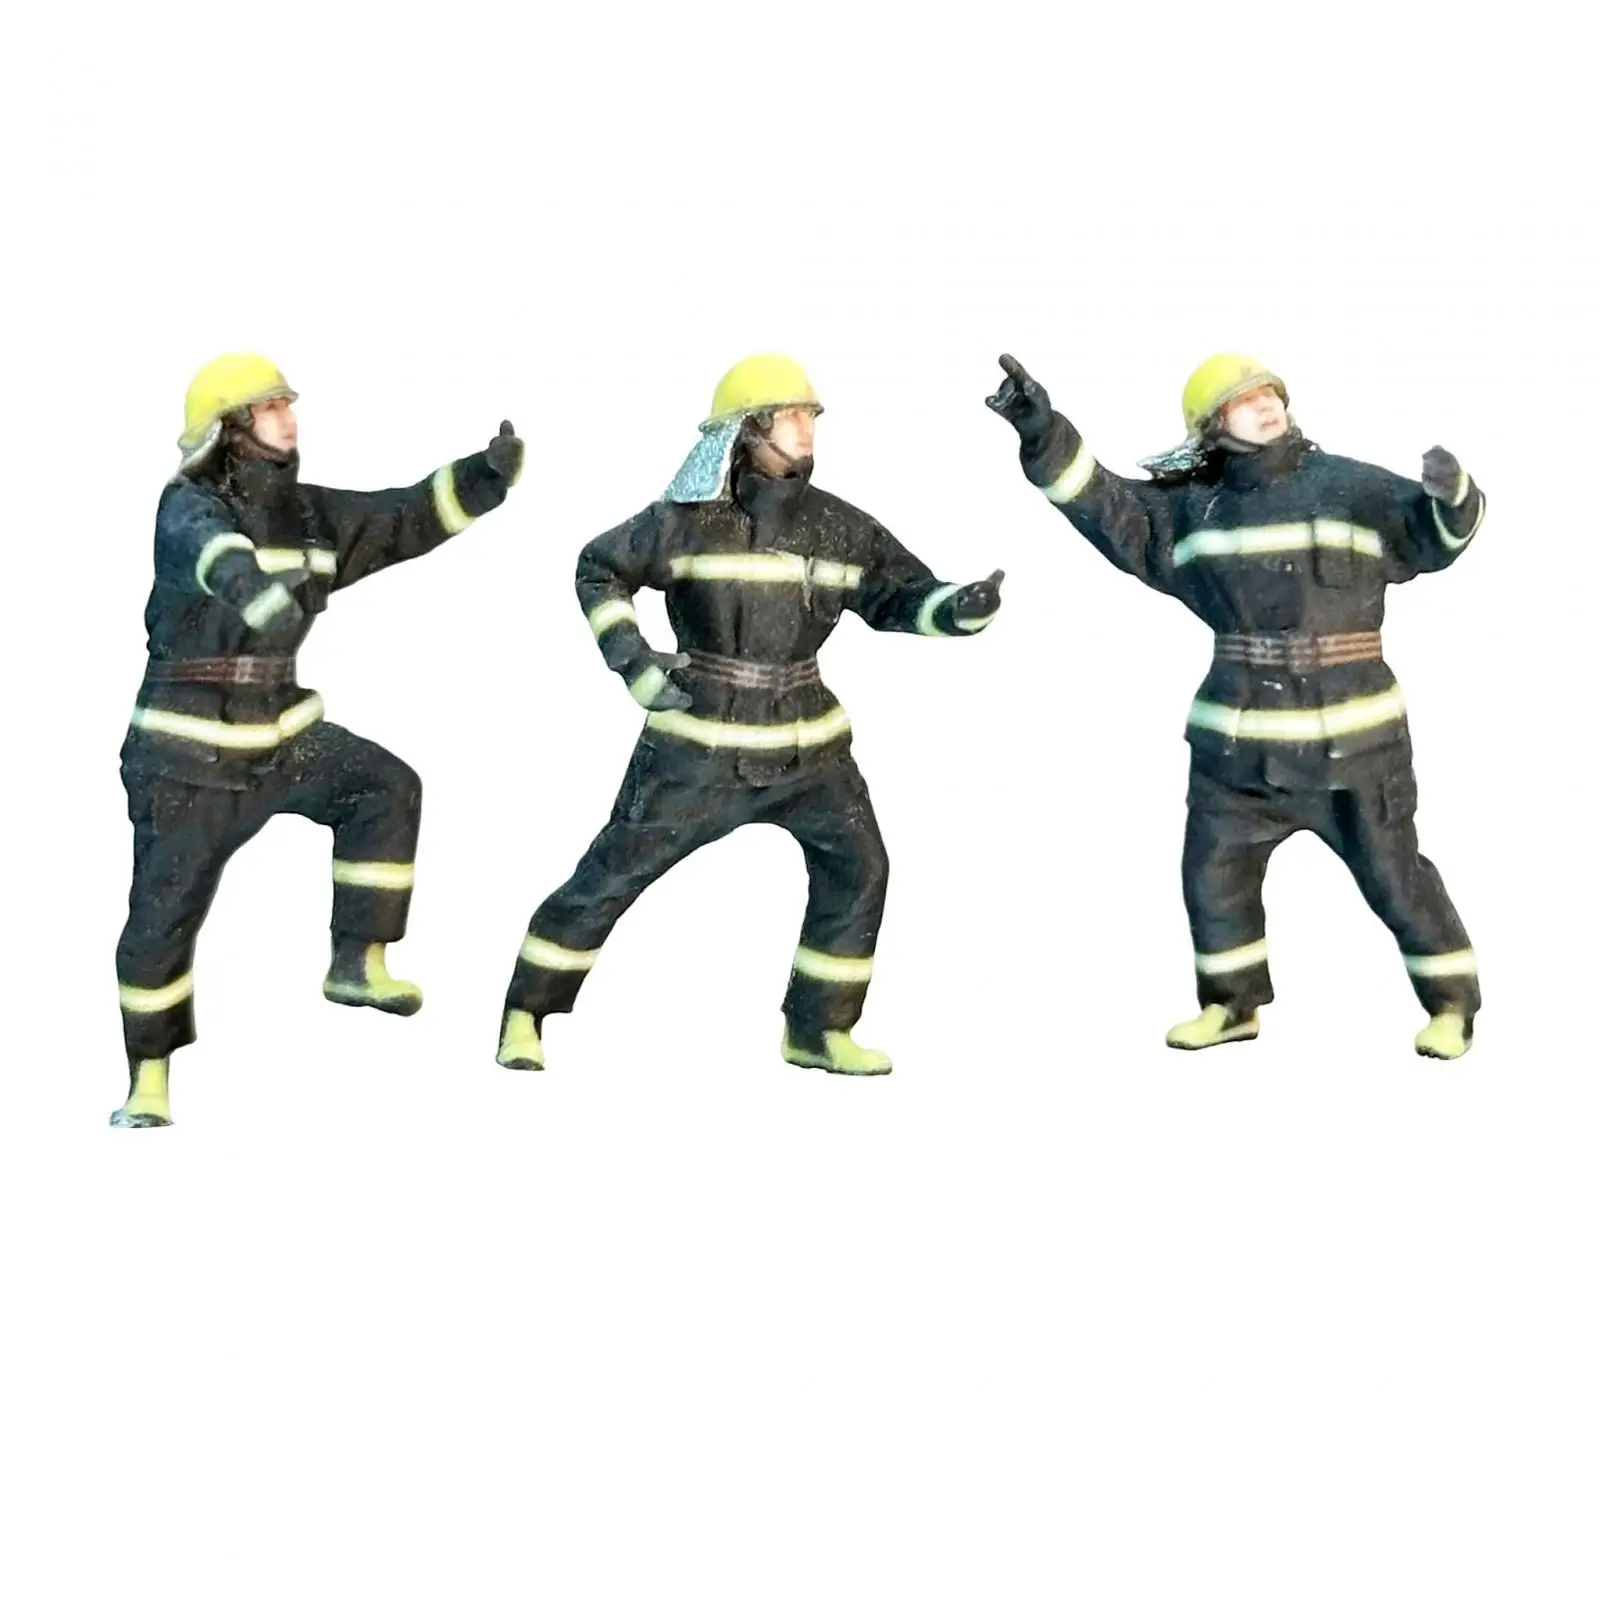 1/64 Diorama Figure Realistic Painted Firemen Playset for Street Dollhouse Accessories Railway Collections Model Building Kits